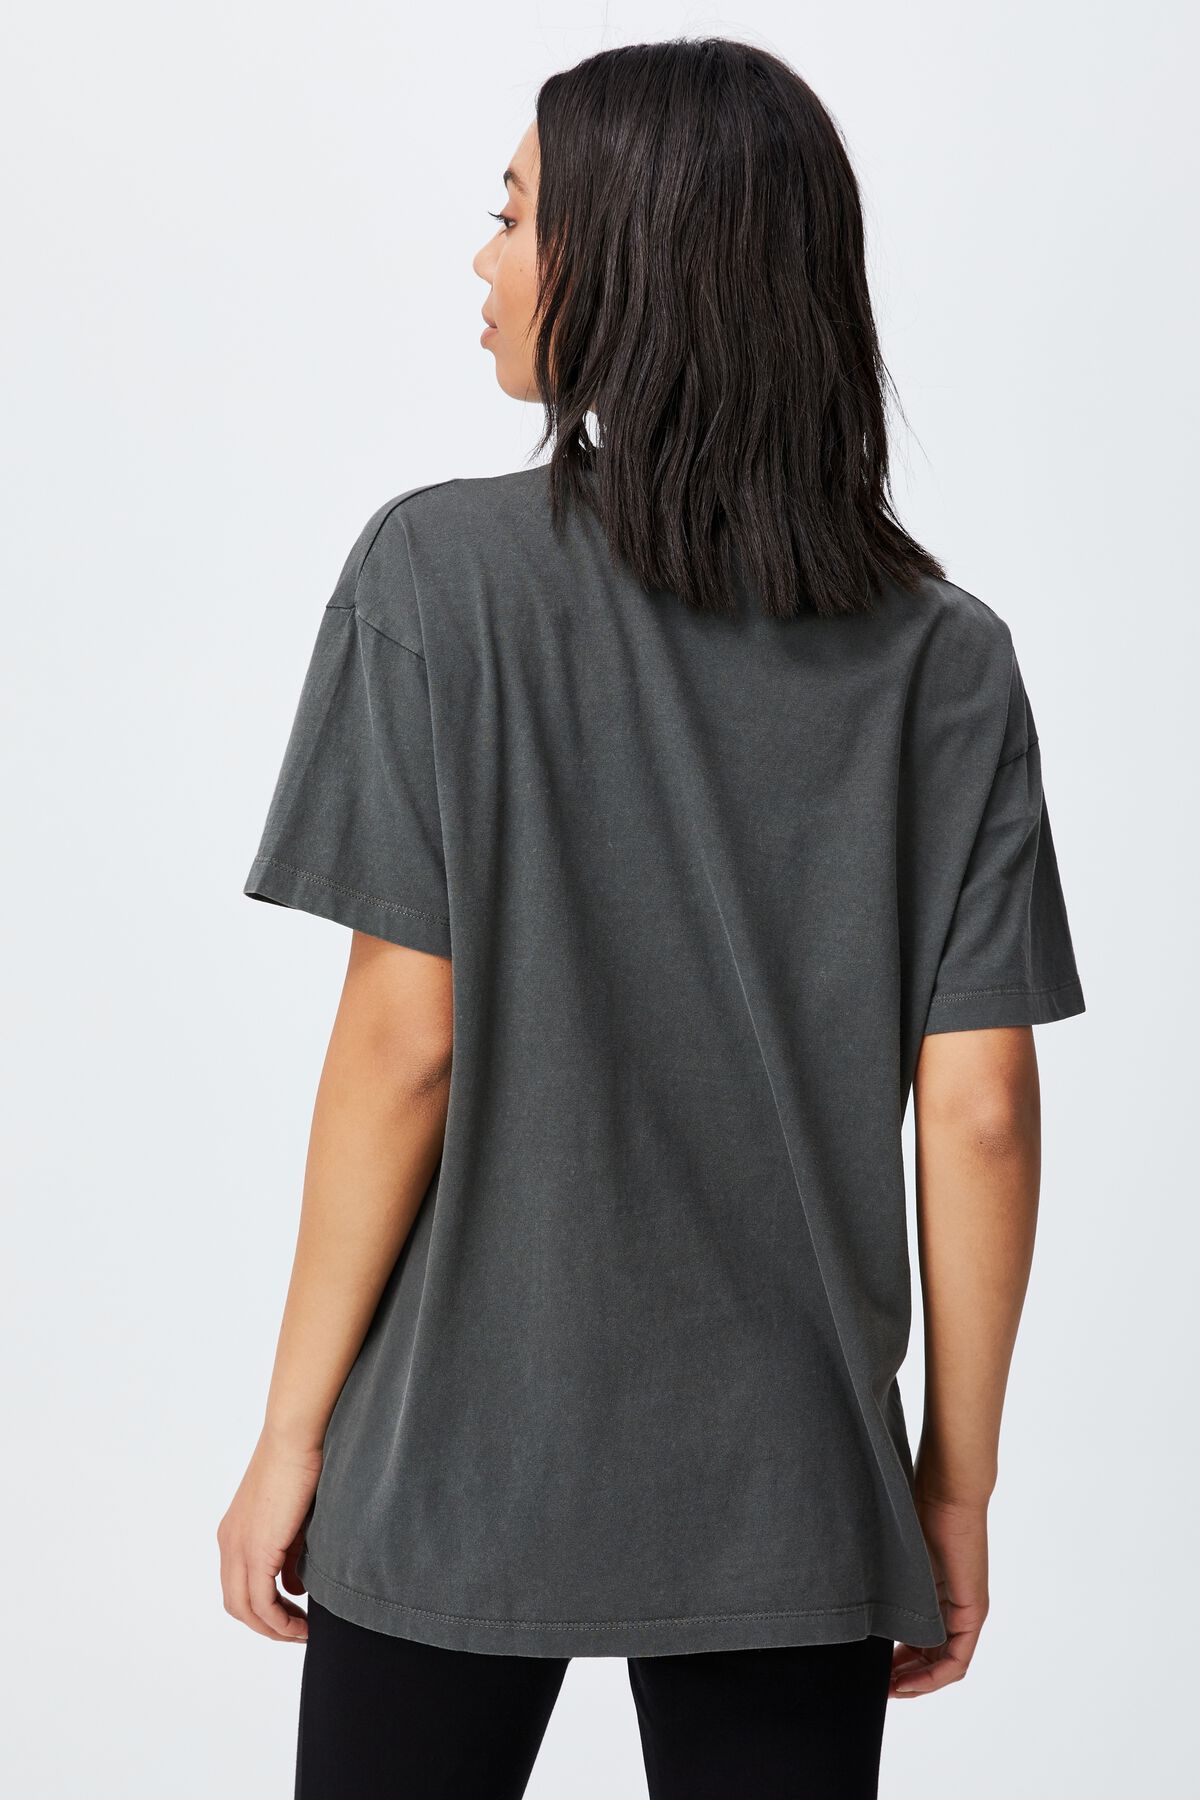 The Relaxed Boyfriend Graphic Tee | Cotton On (ANZ)